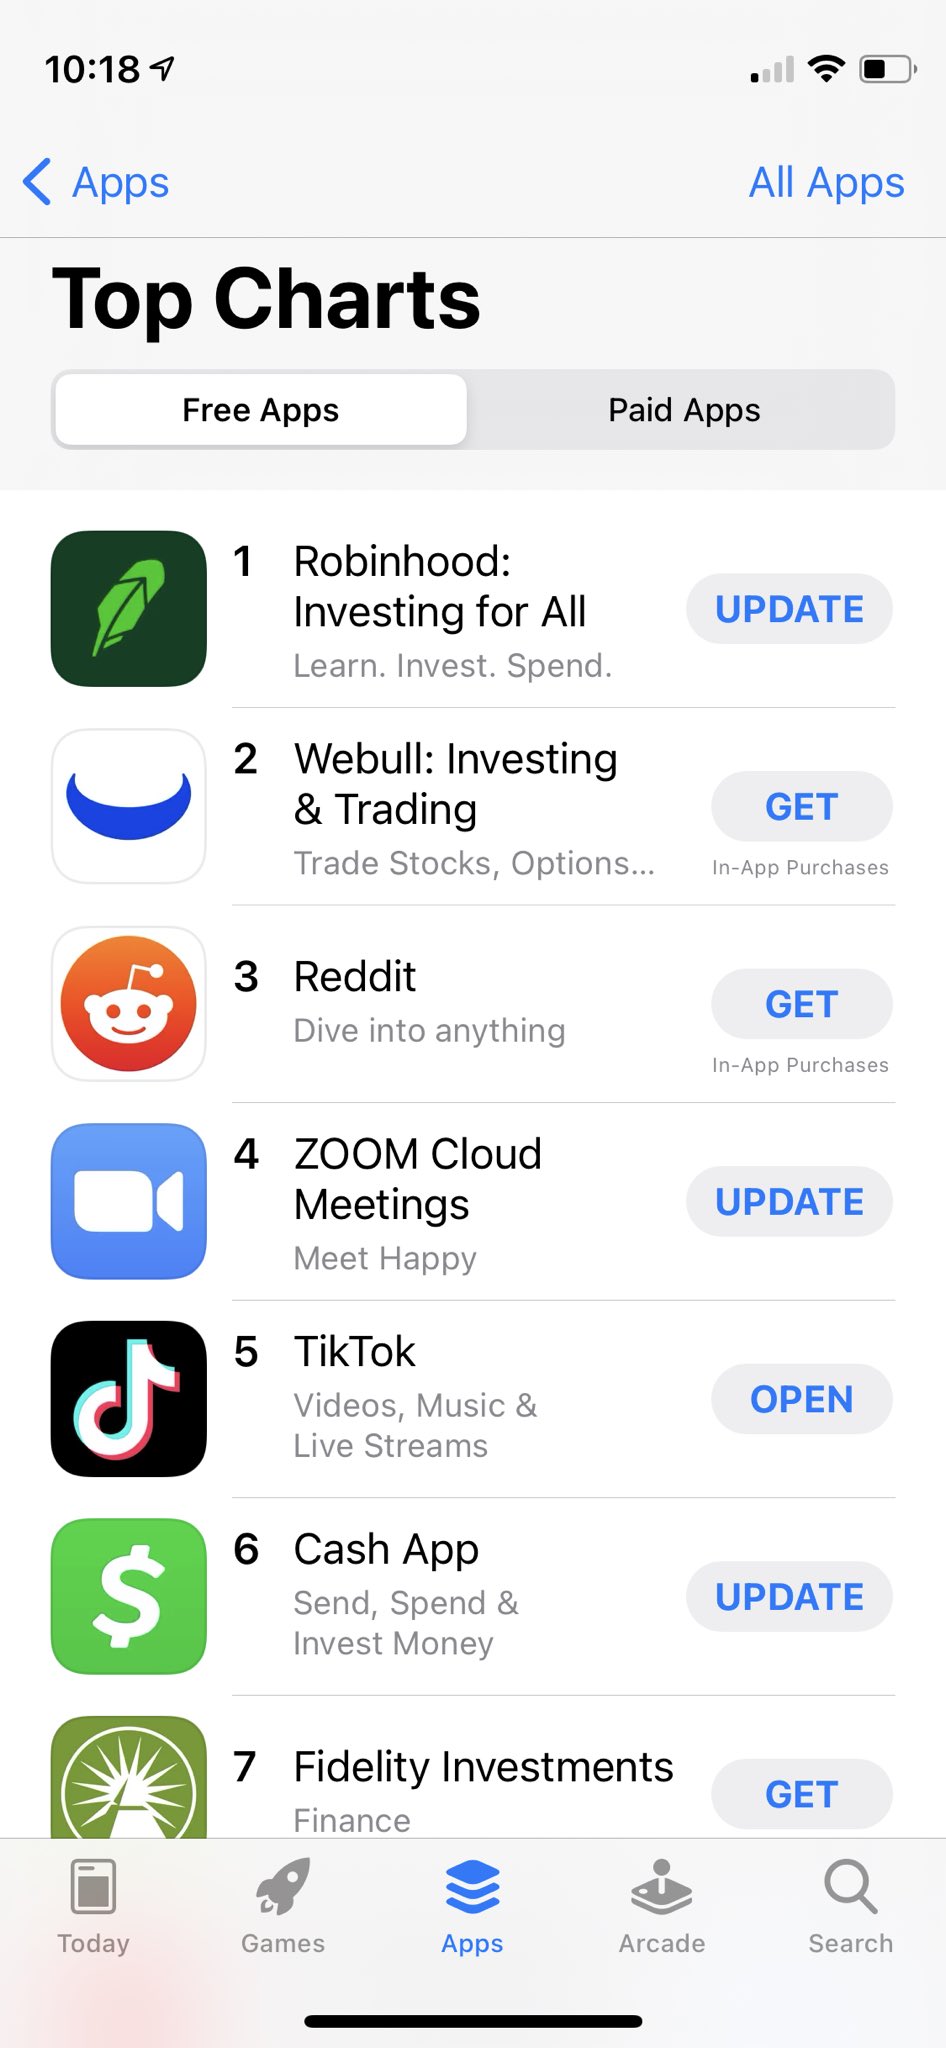 Fidelity Investments on the App Store